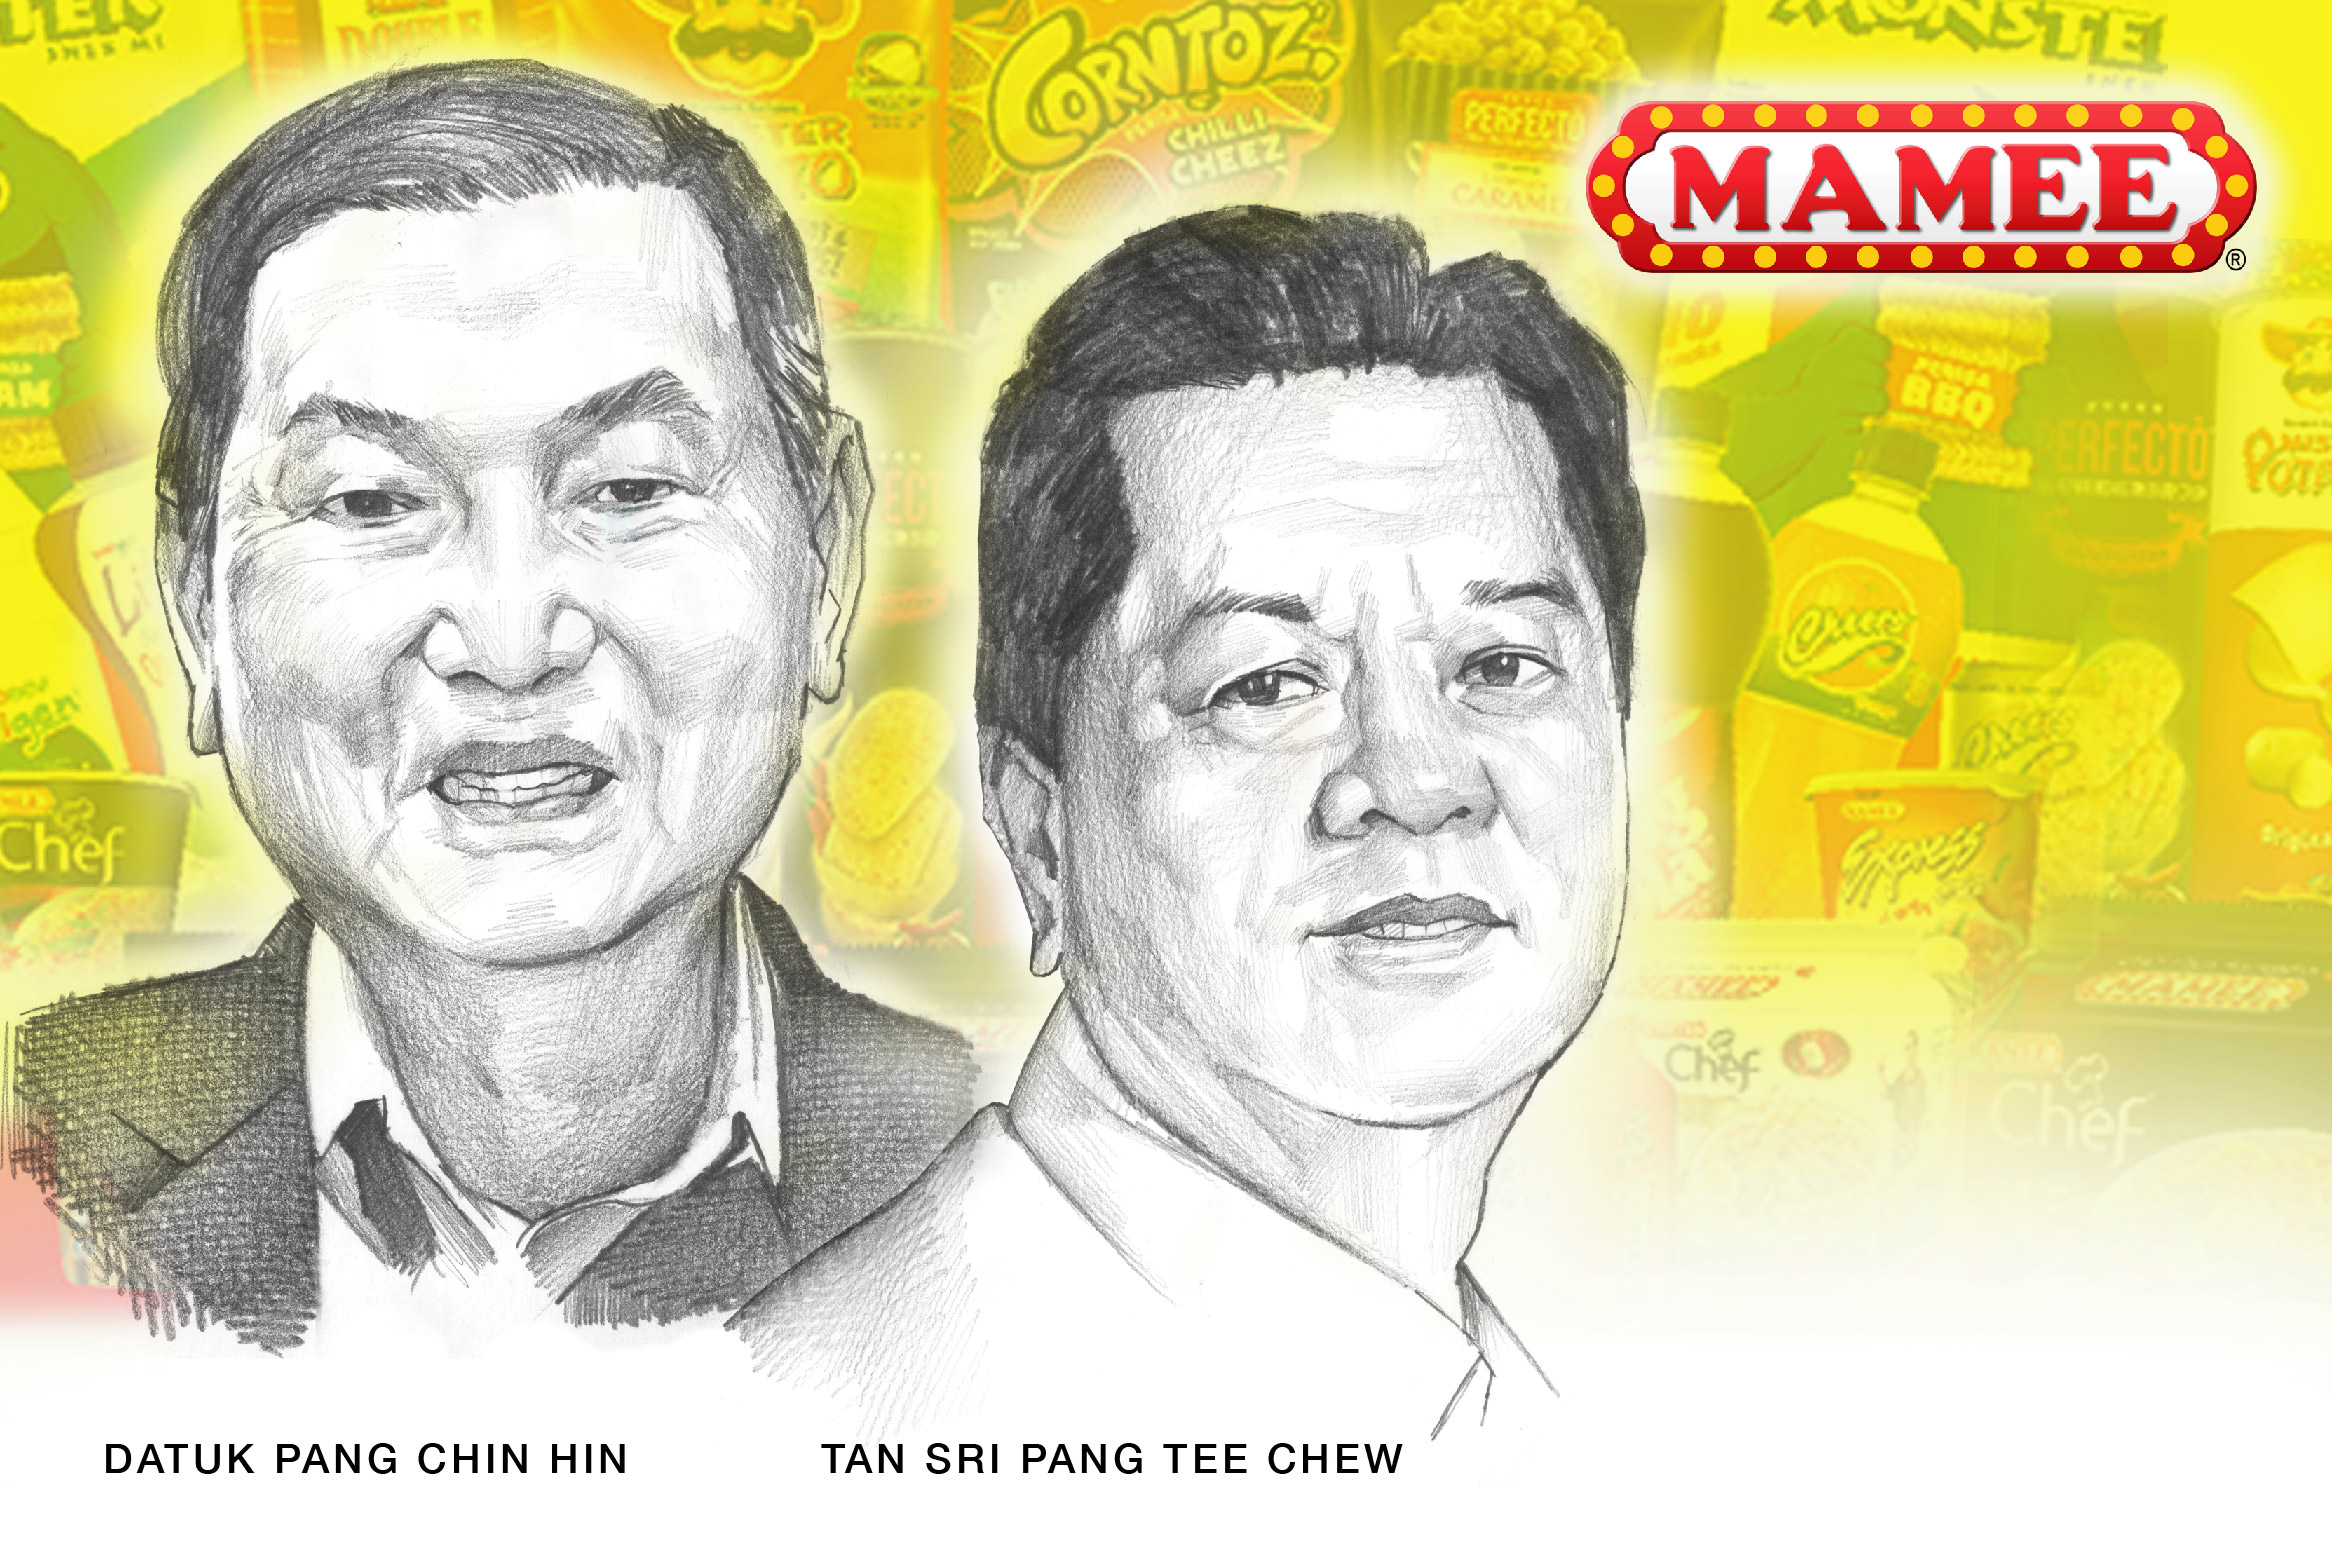 MAMEE-Double Decker (M) Berhad - Pang's family builds a Noodle Snack Legacy